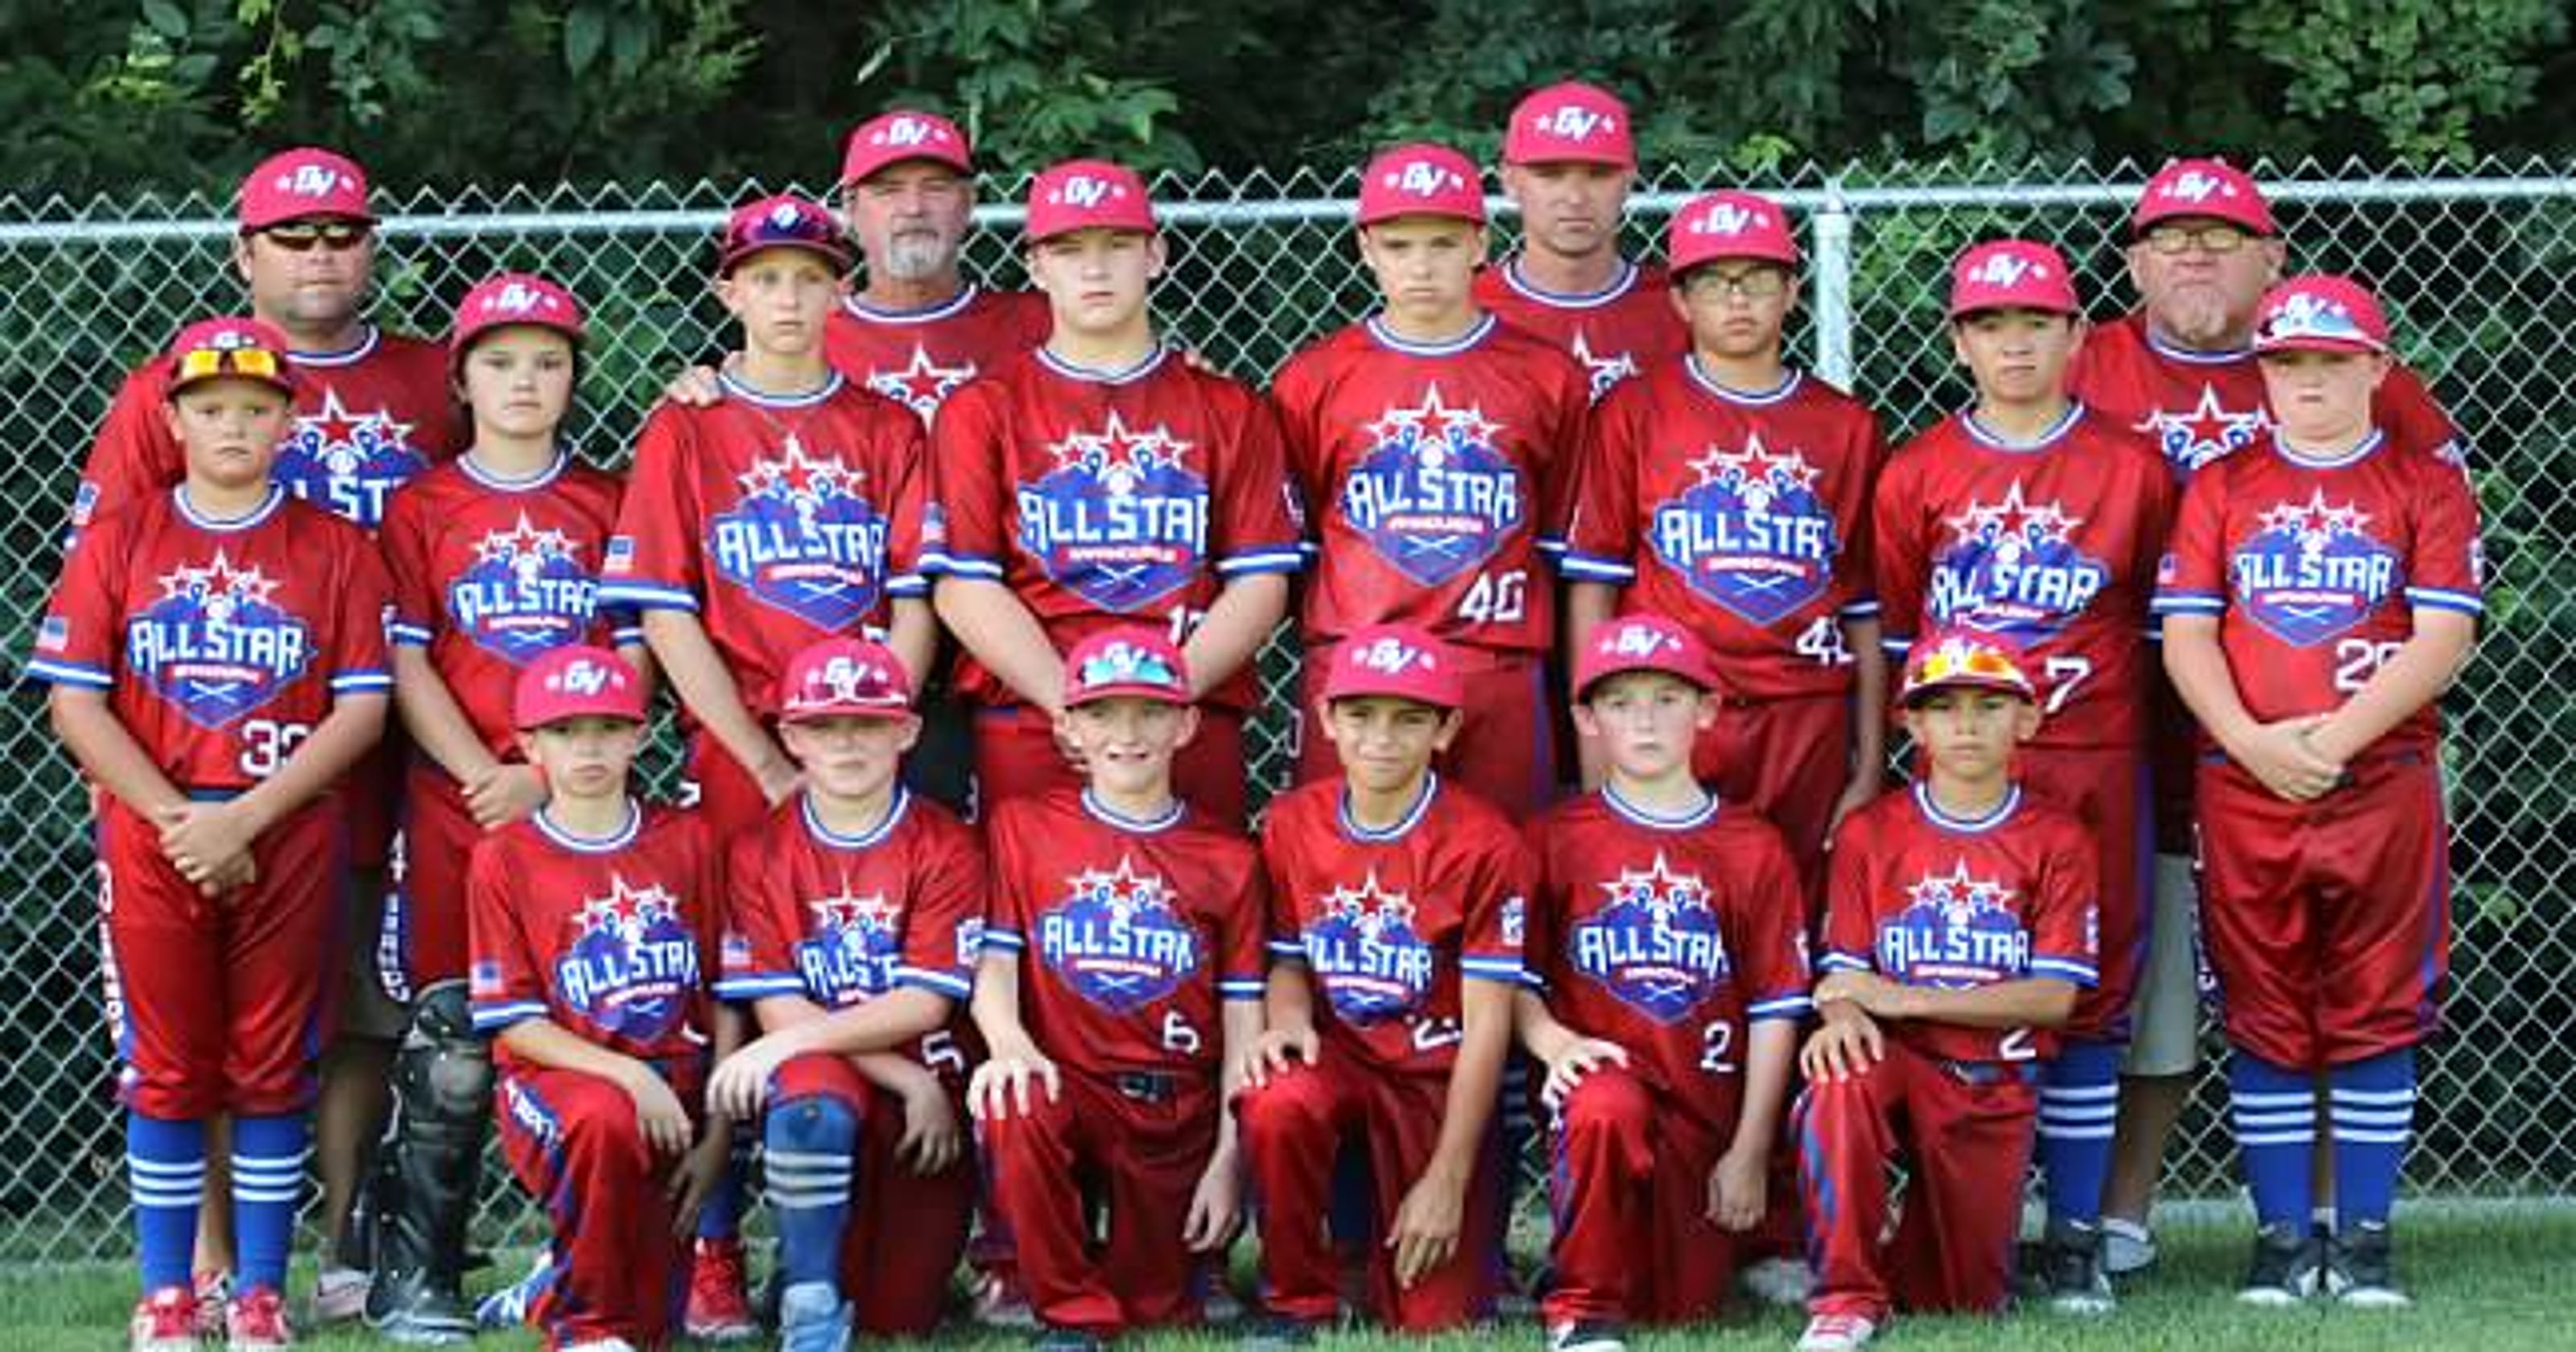 Grandview Little League How to watch Iowa's team in the LLWS